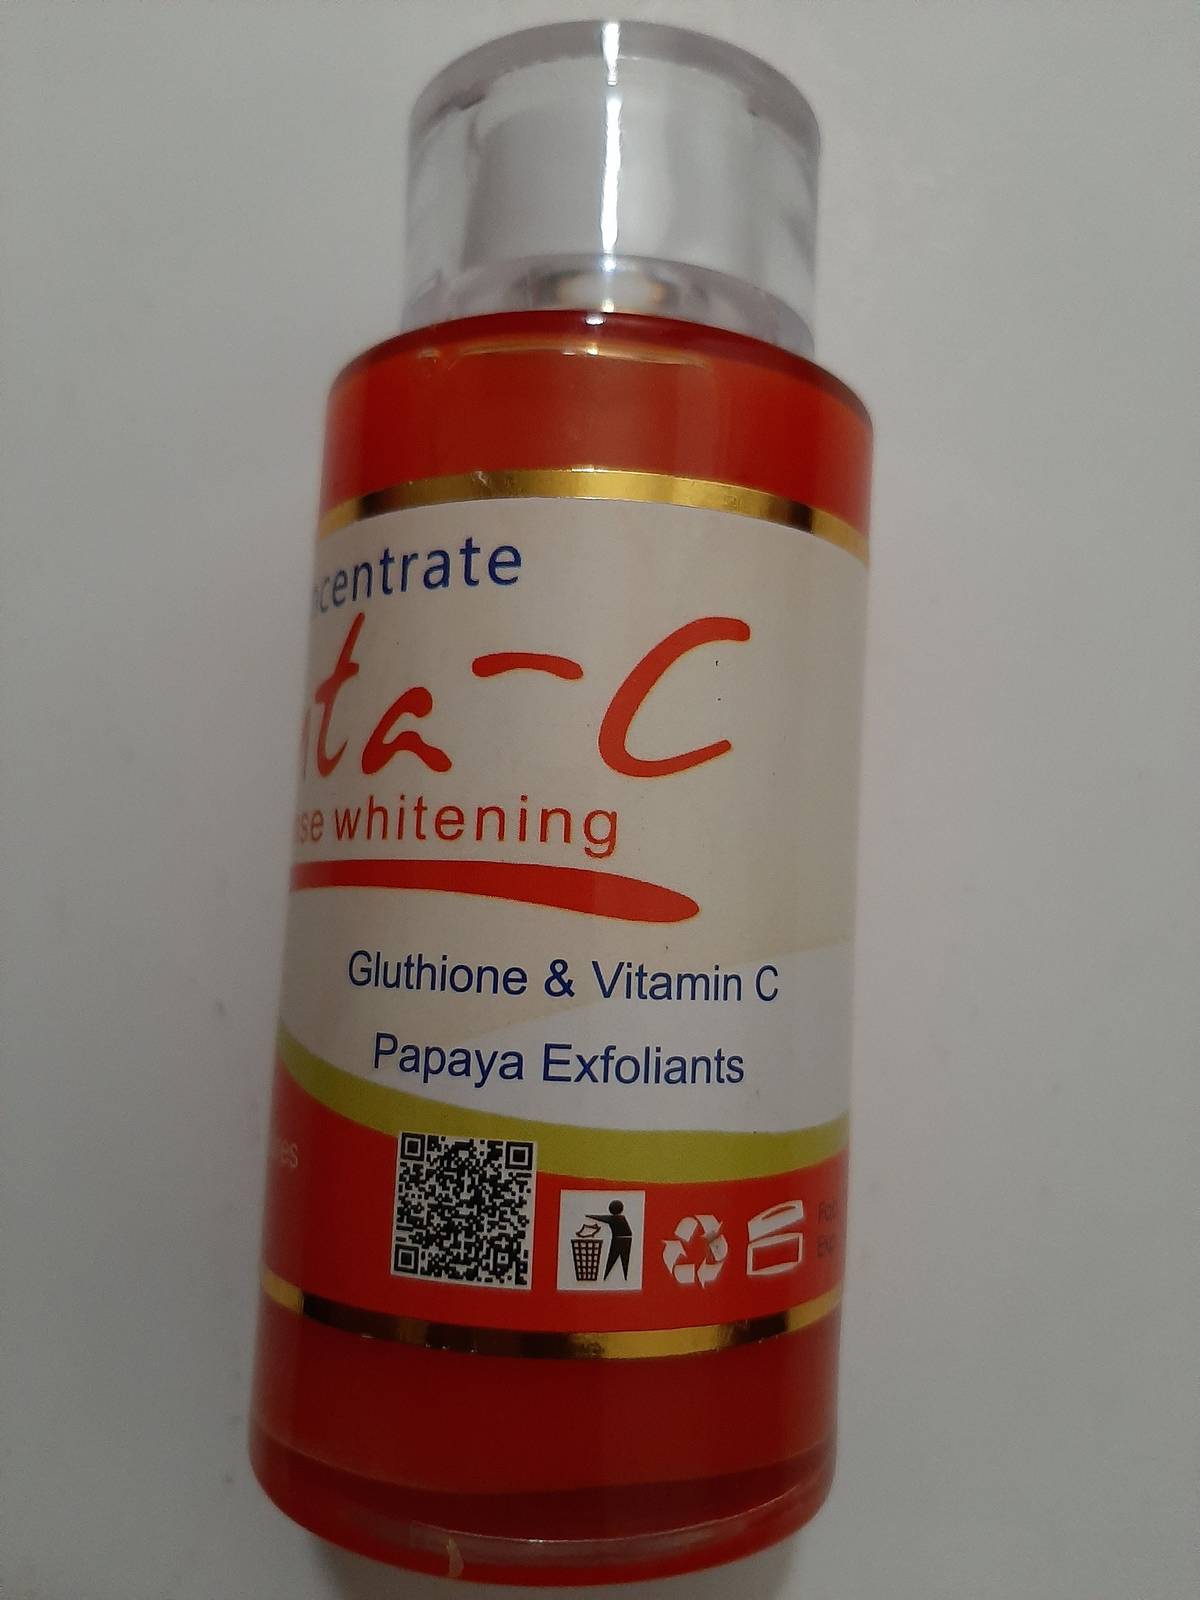 Gluta-c intense whitening concentrate with Glutathione, vitamin and papaya exfol - $27.99